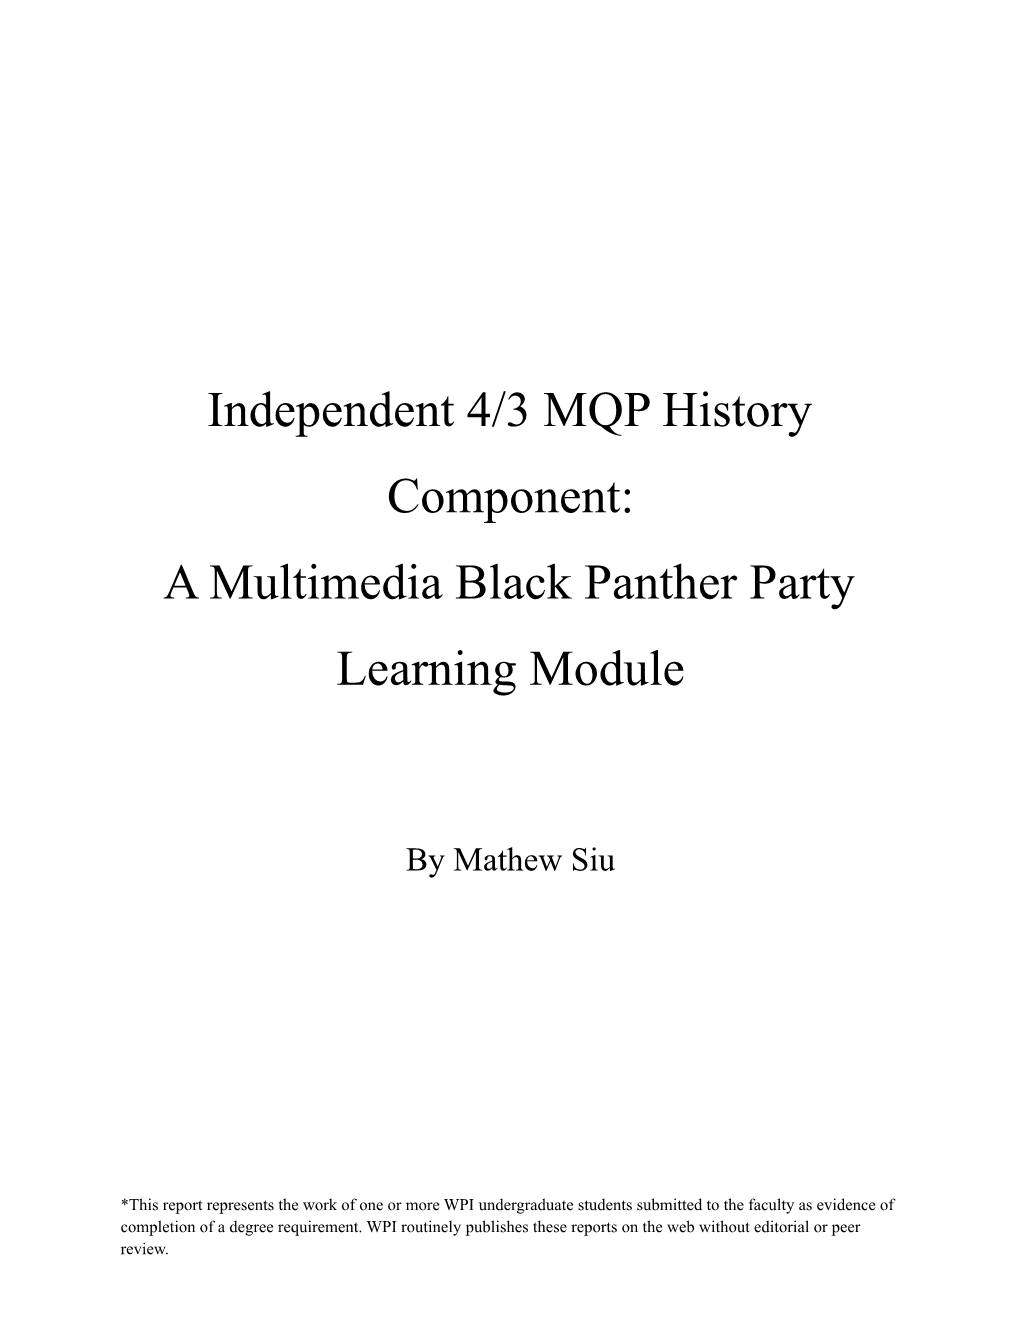 Independent 4/3 MQP History Component: a Multimedia Black Panther Party Learning Module